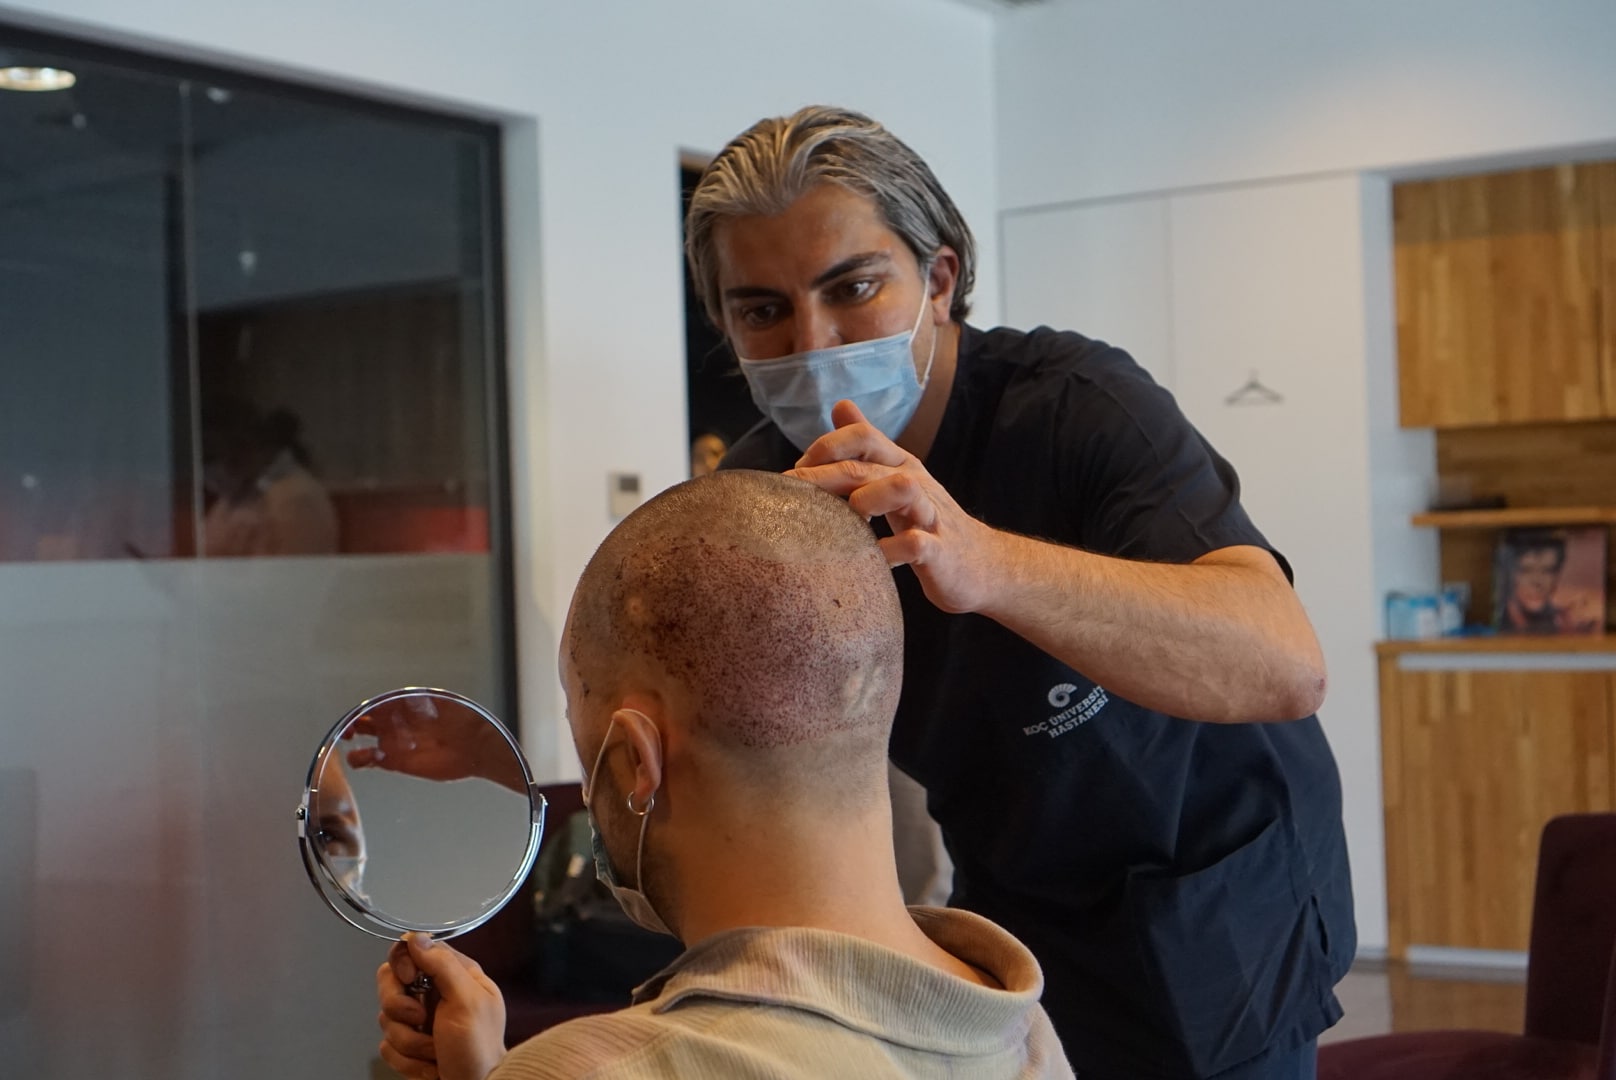 Does a Hair Transplant Close-up Look Good?